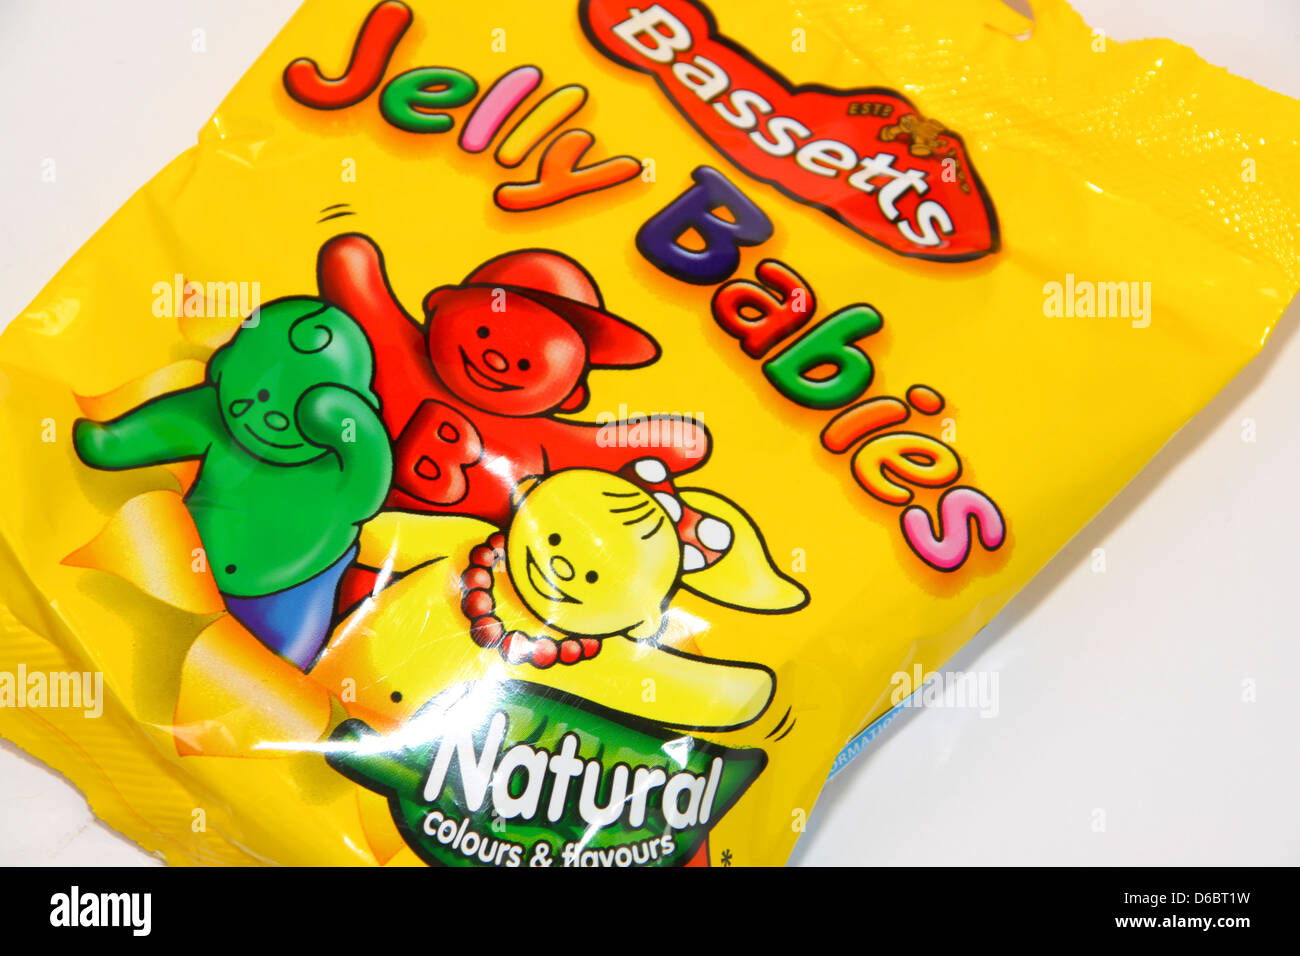 190g packet of Bassetts Jelly Babies sweets Stock Photo - Alamy